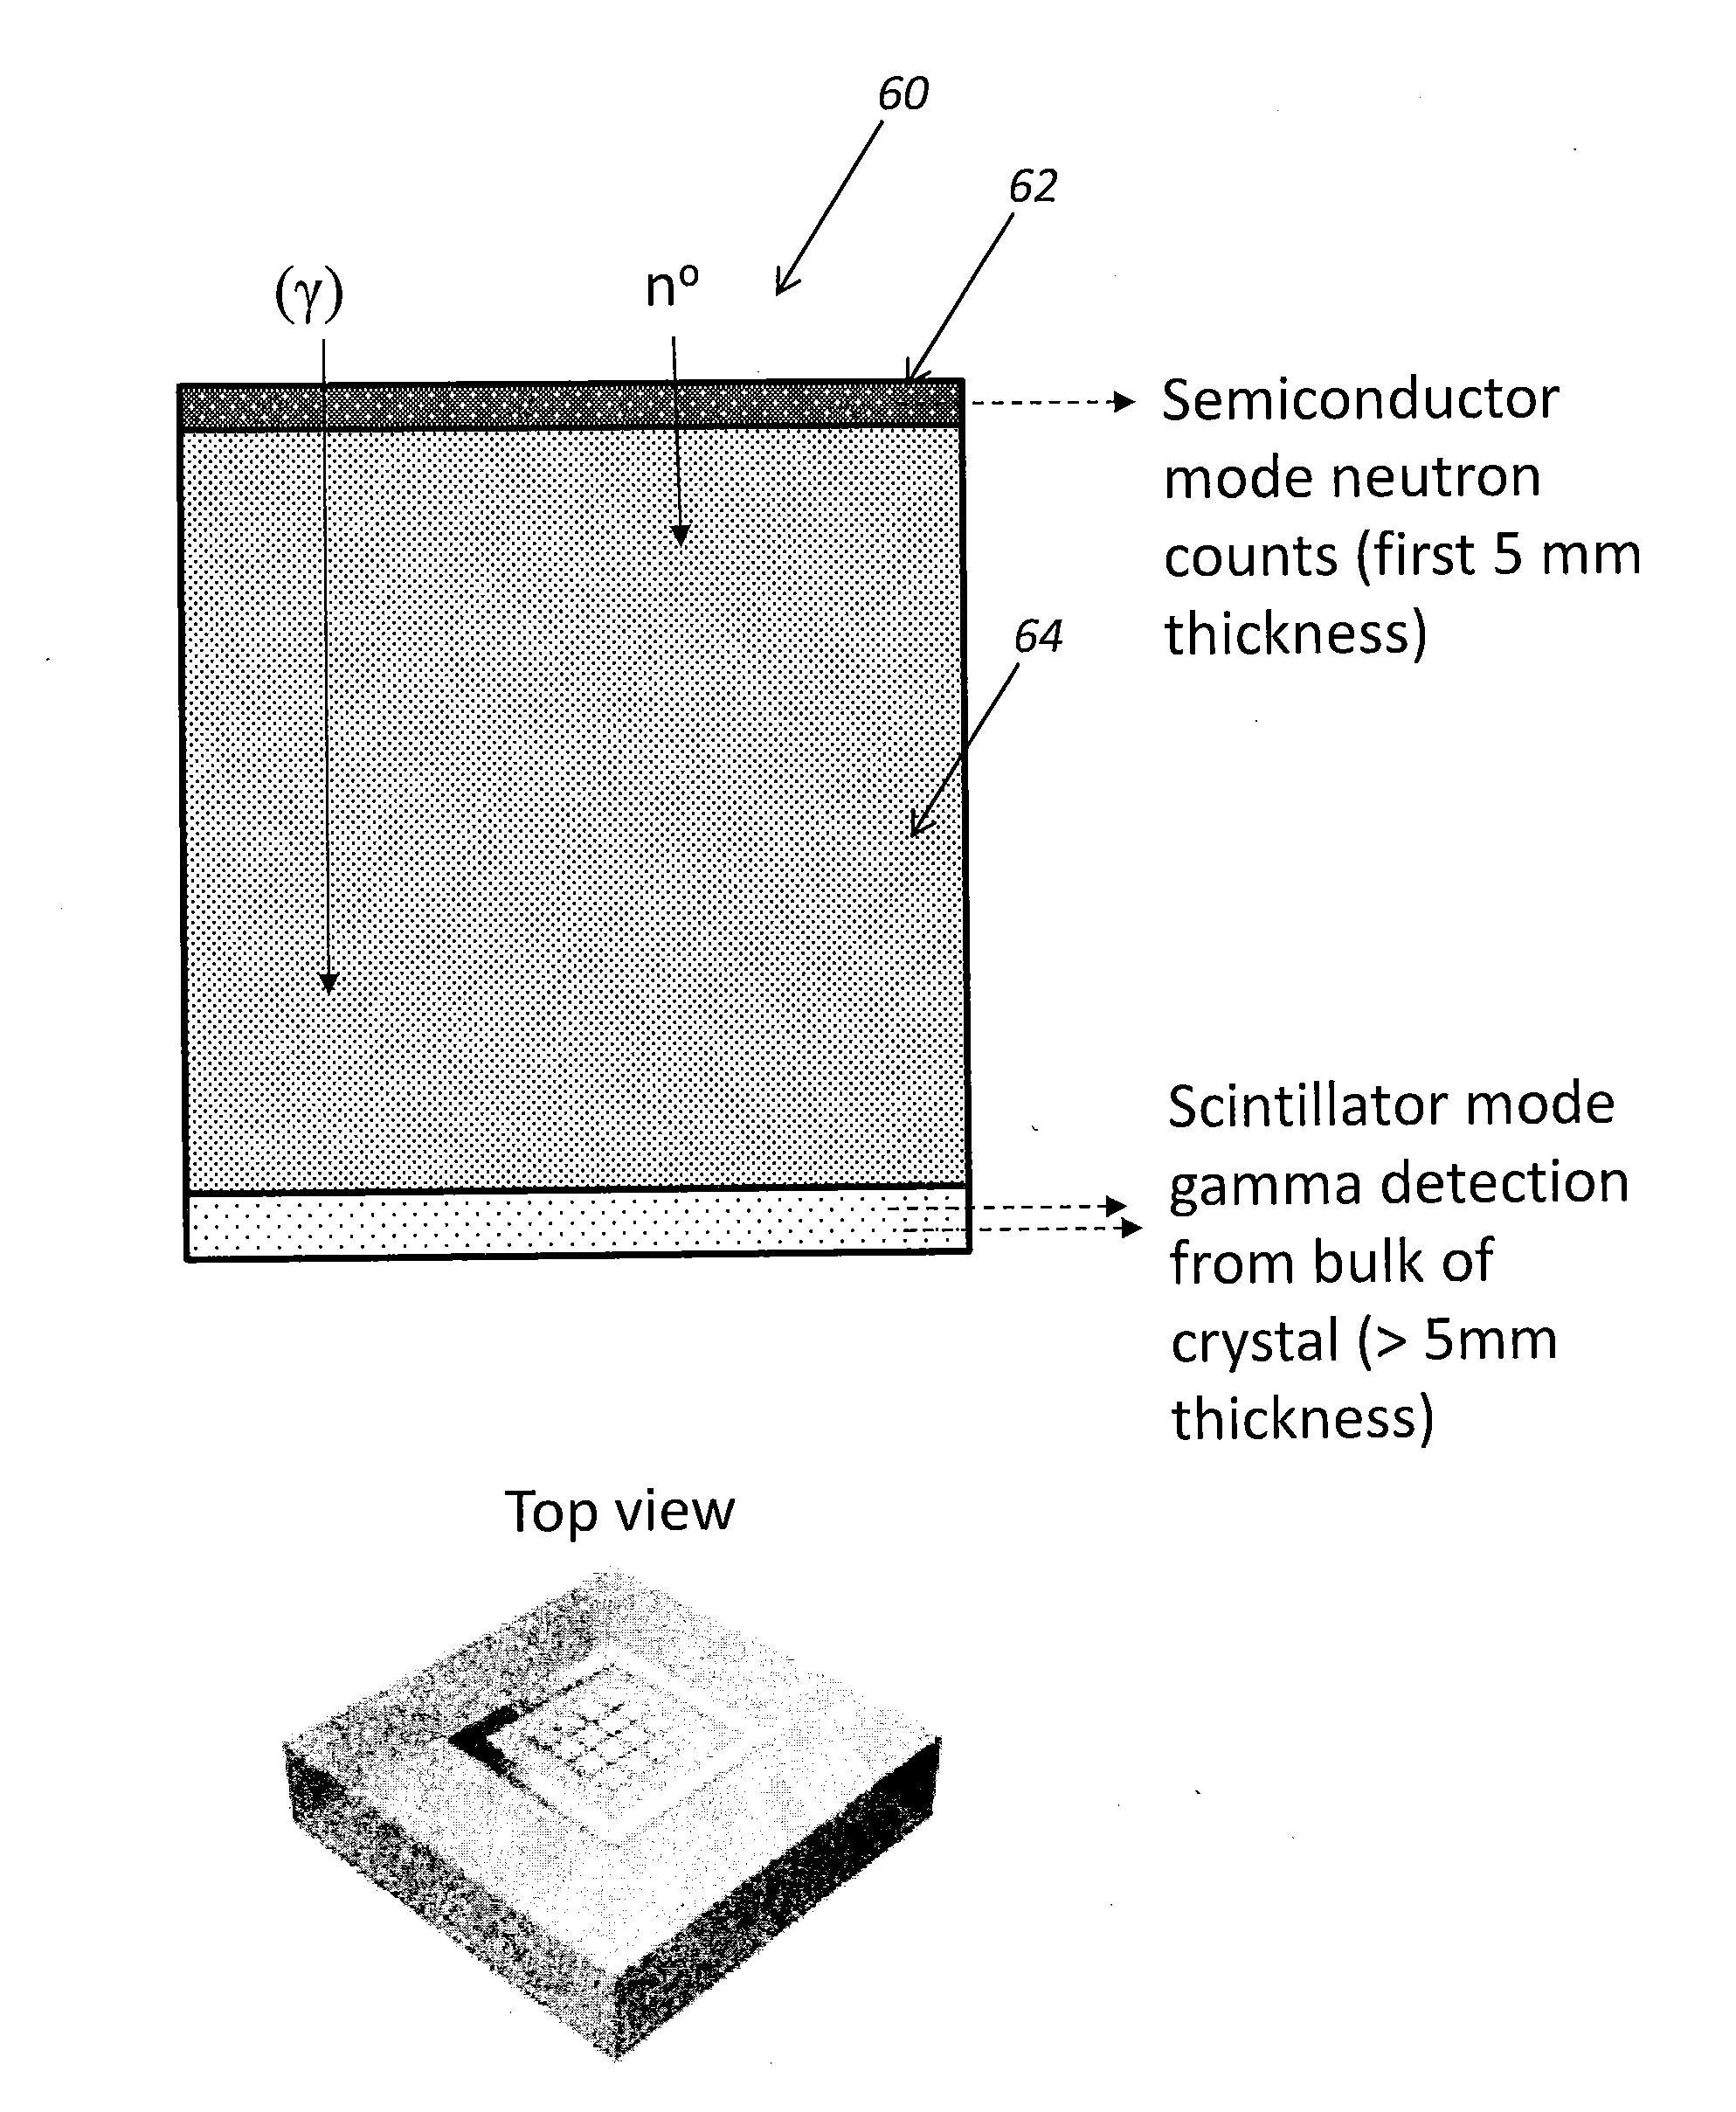 Thermal neutron detector and gamma-ray spectrometer utilizing a single material